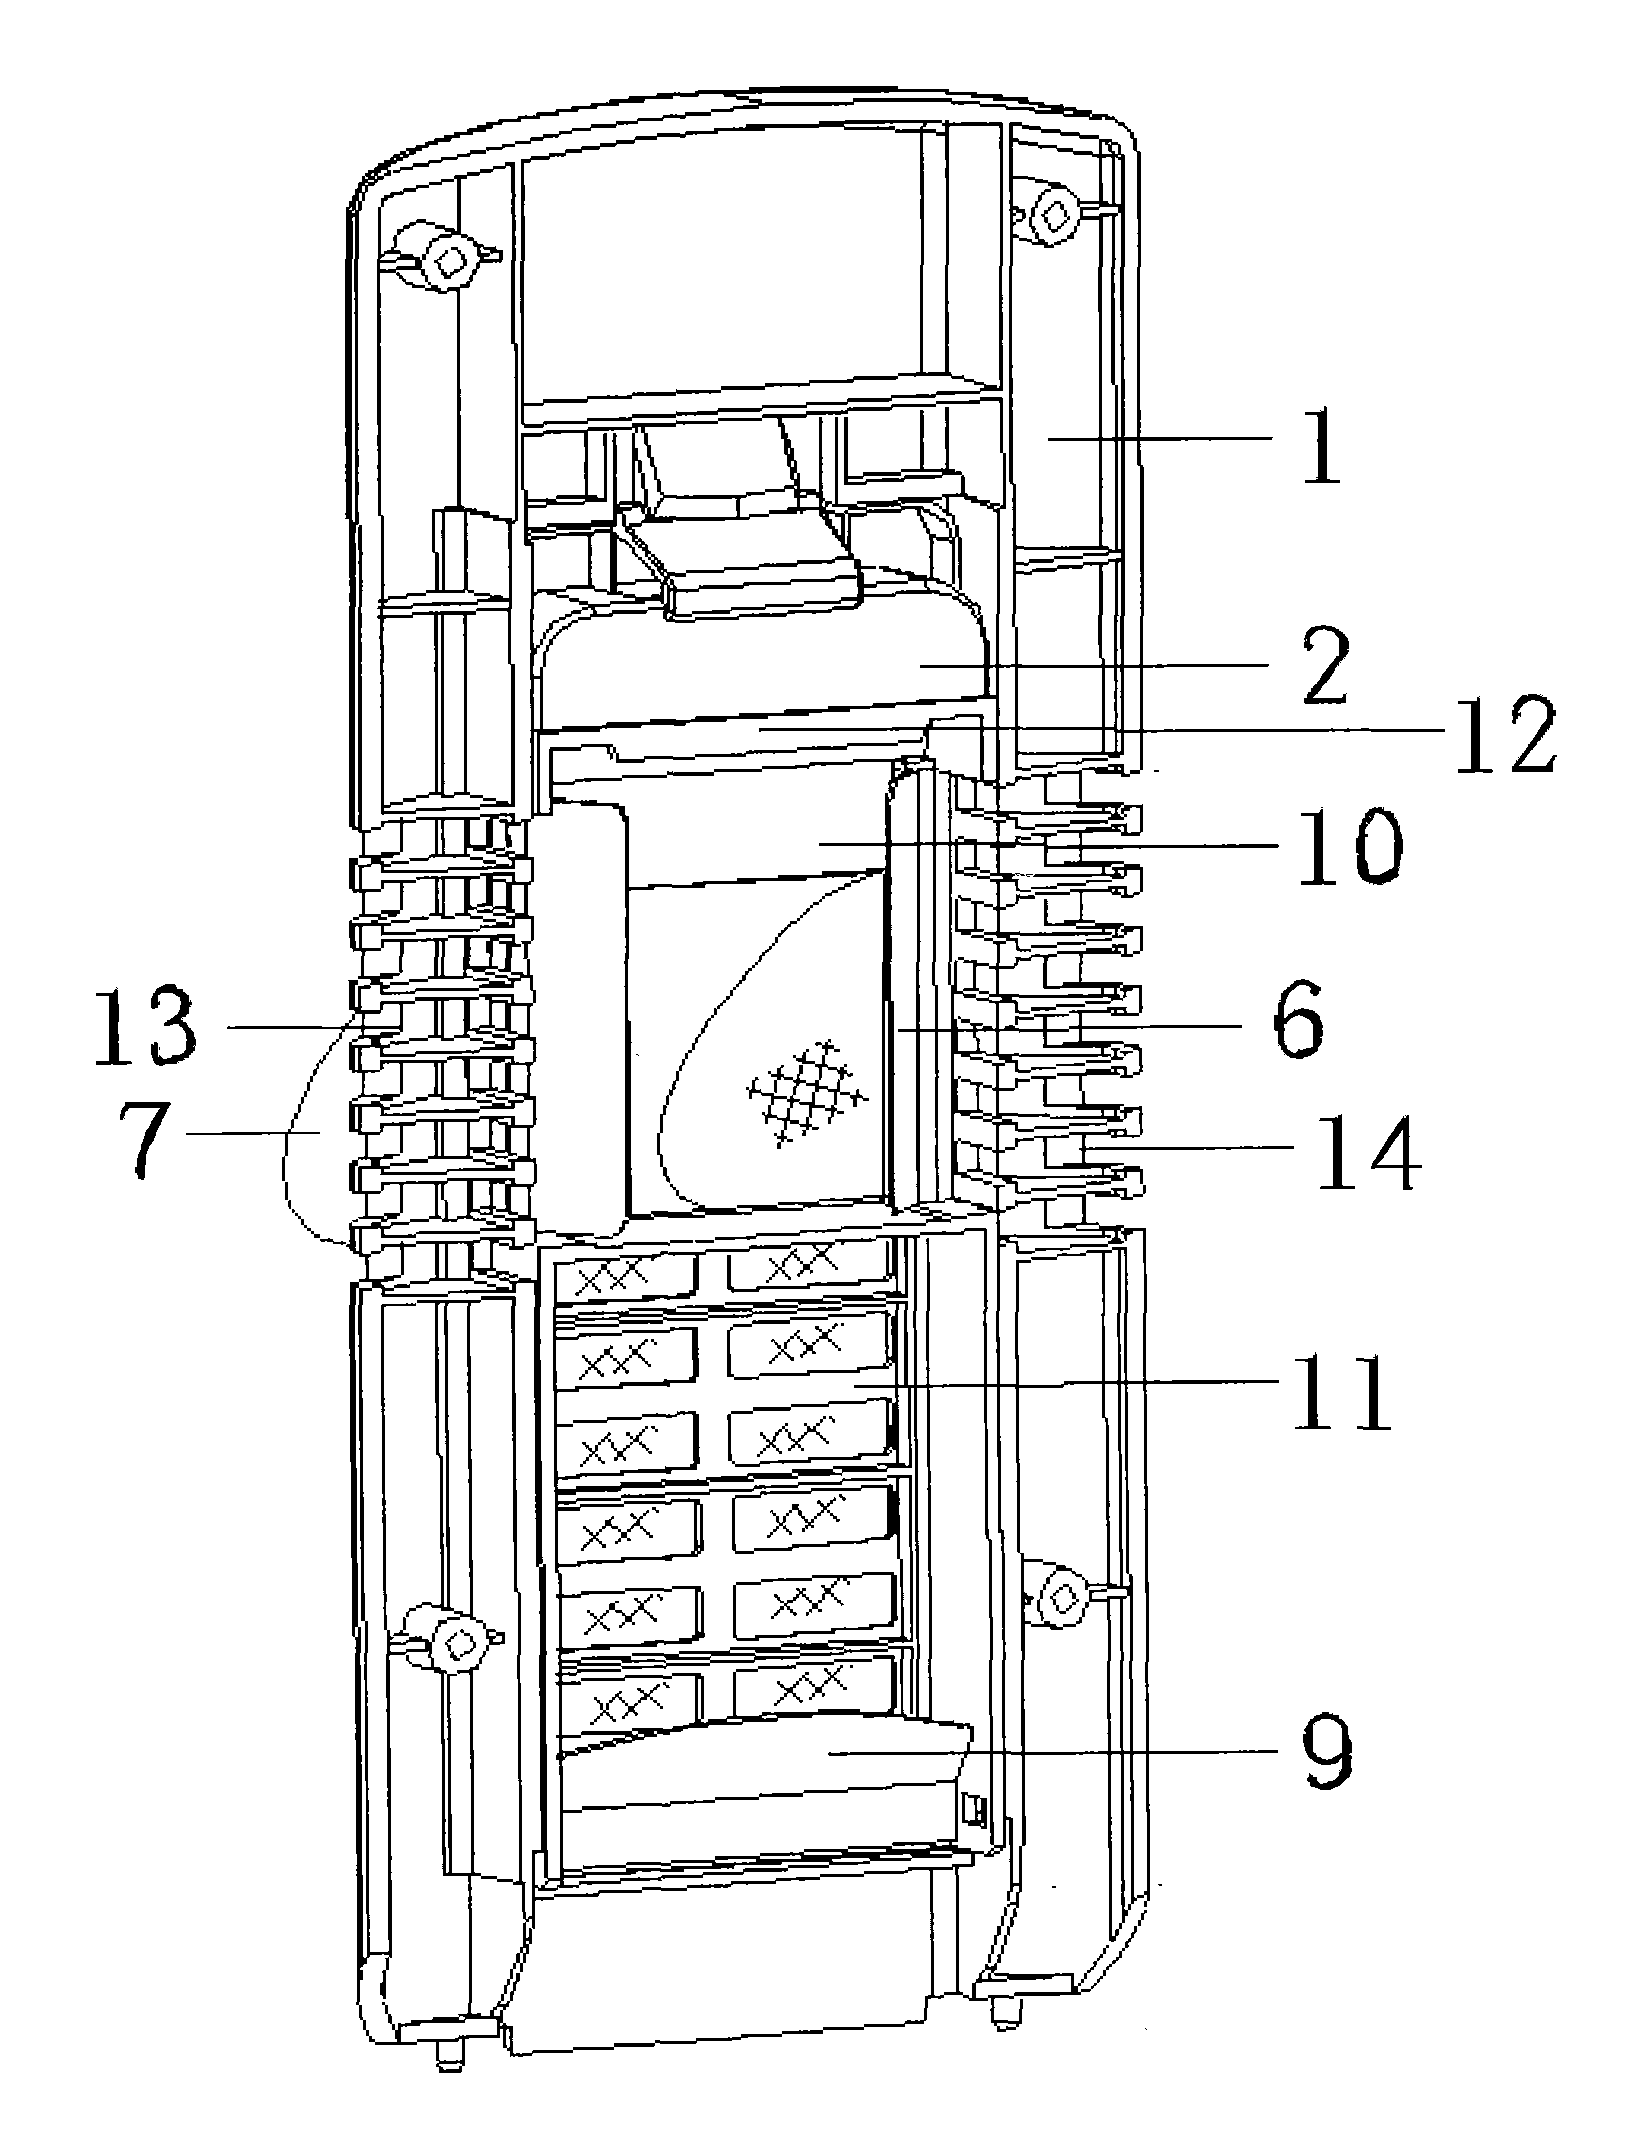 Omnidirectional filtering device for washing machine